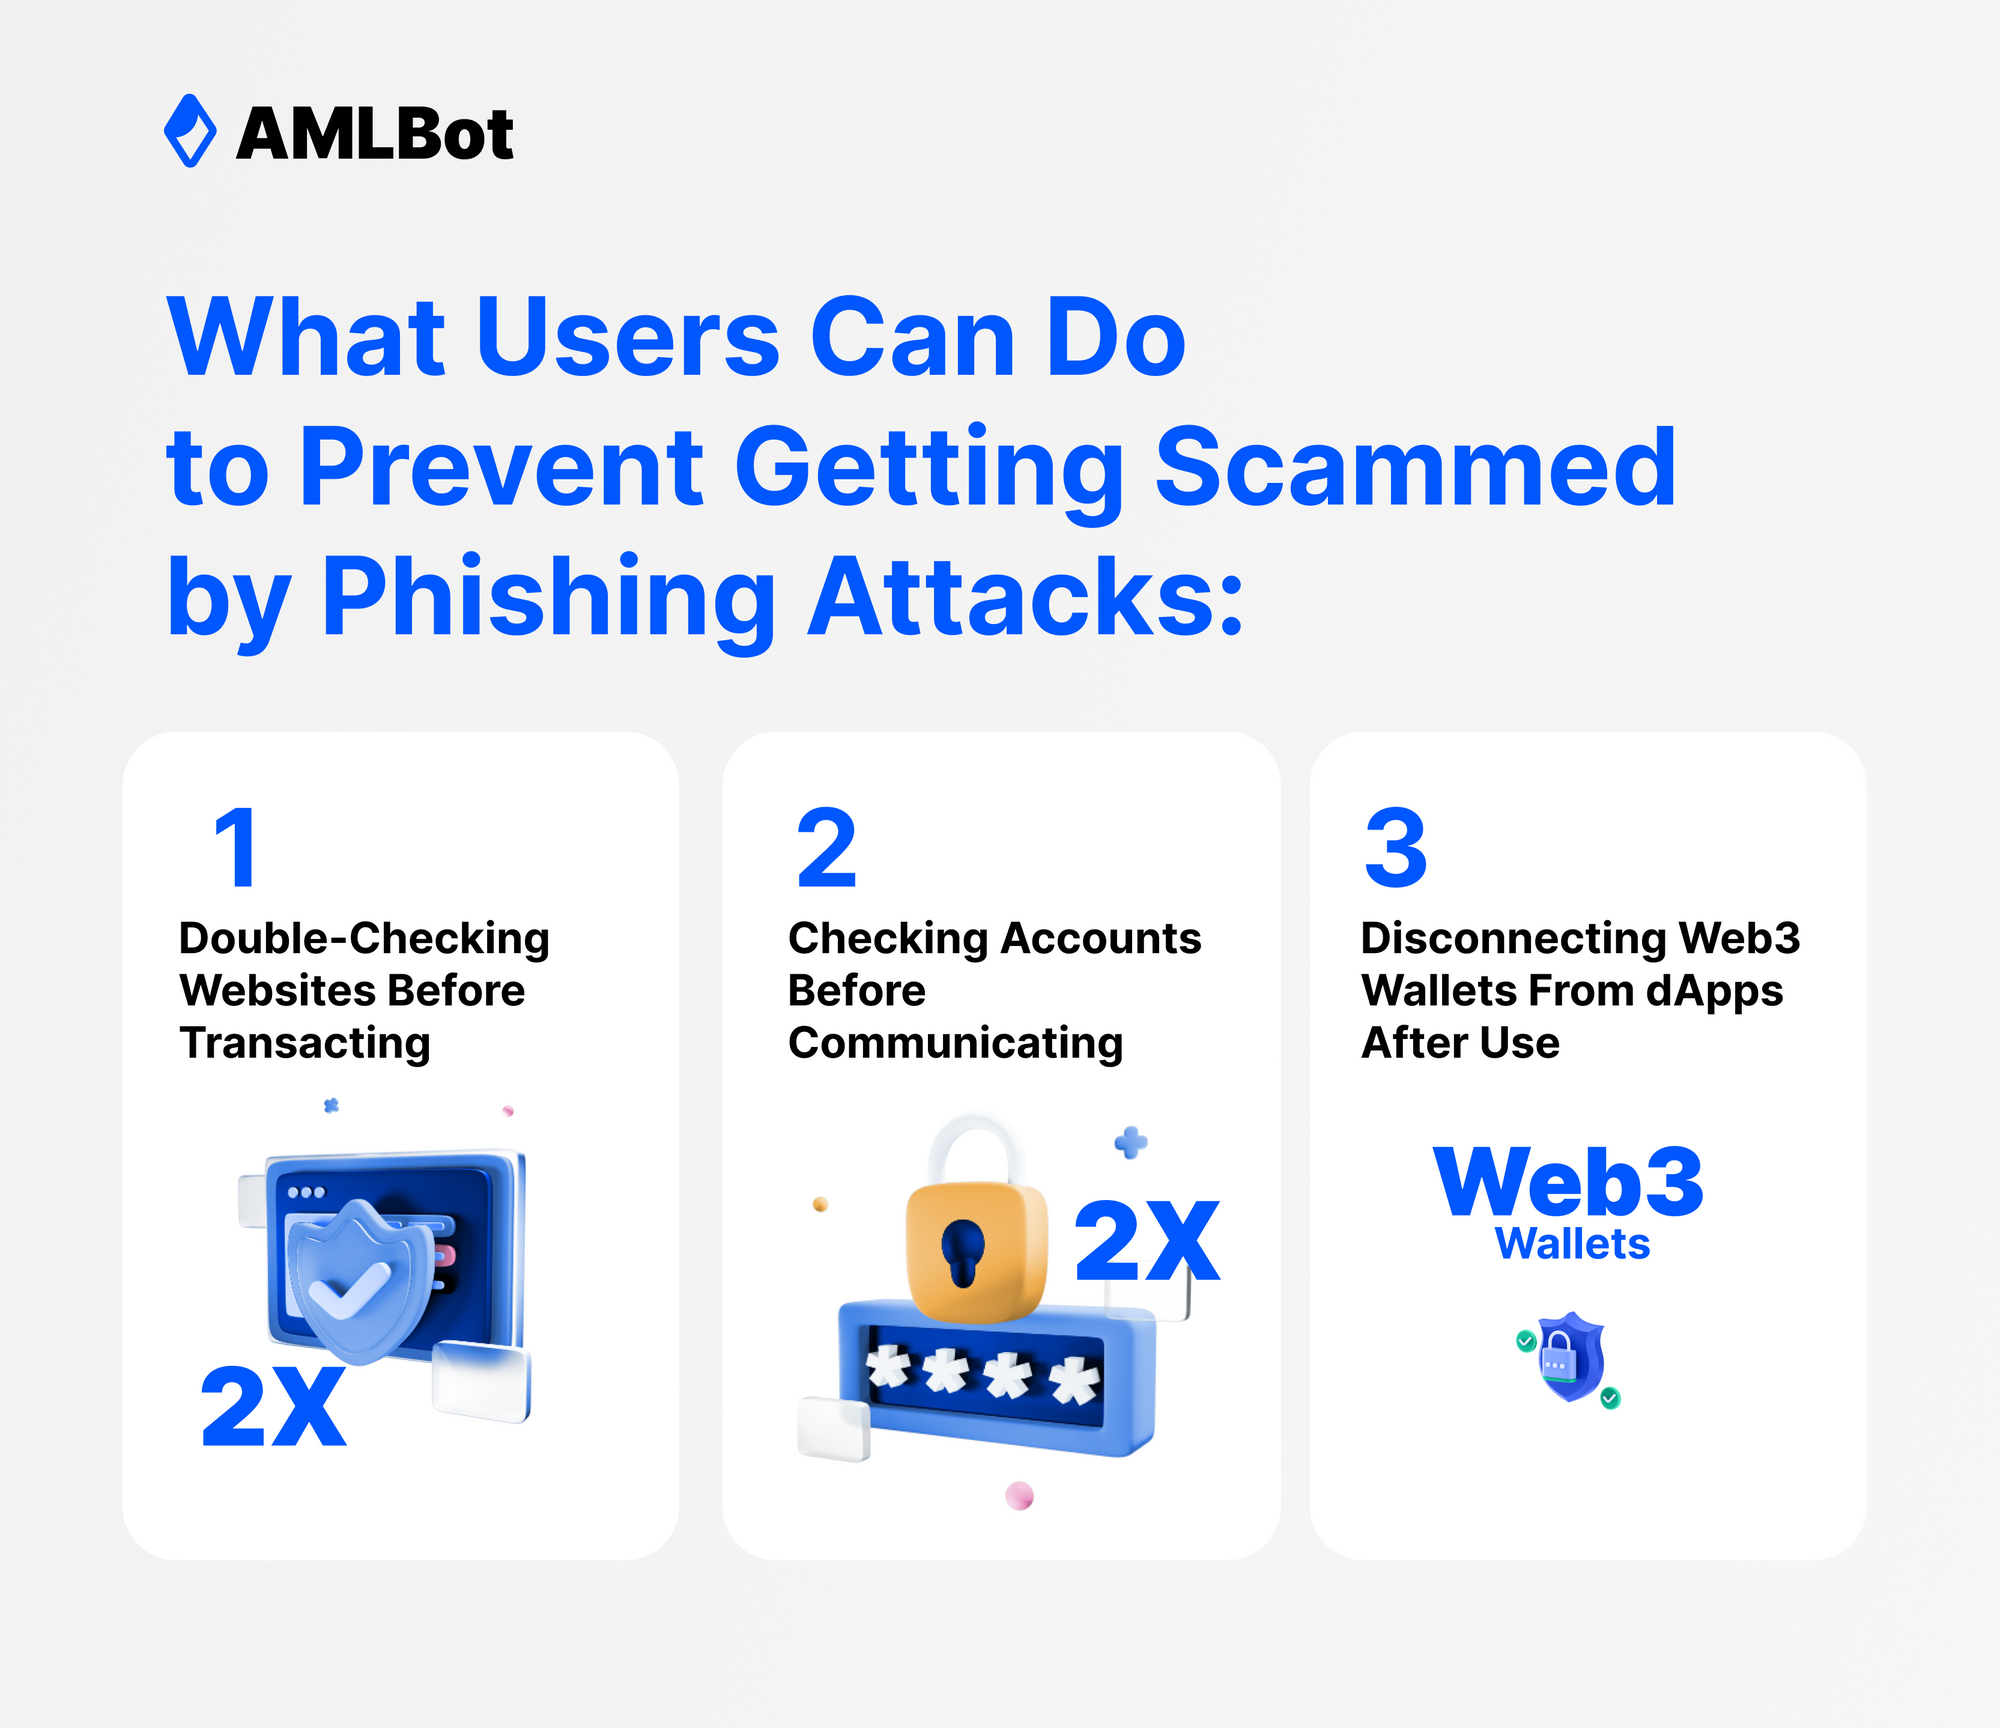 What Users Can Do to Prevent Getting Scammed by Phishing Attacks